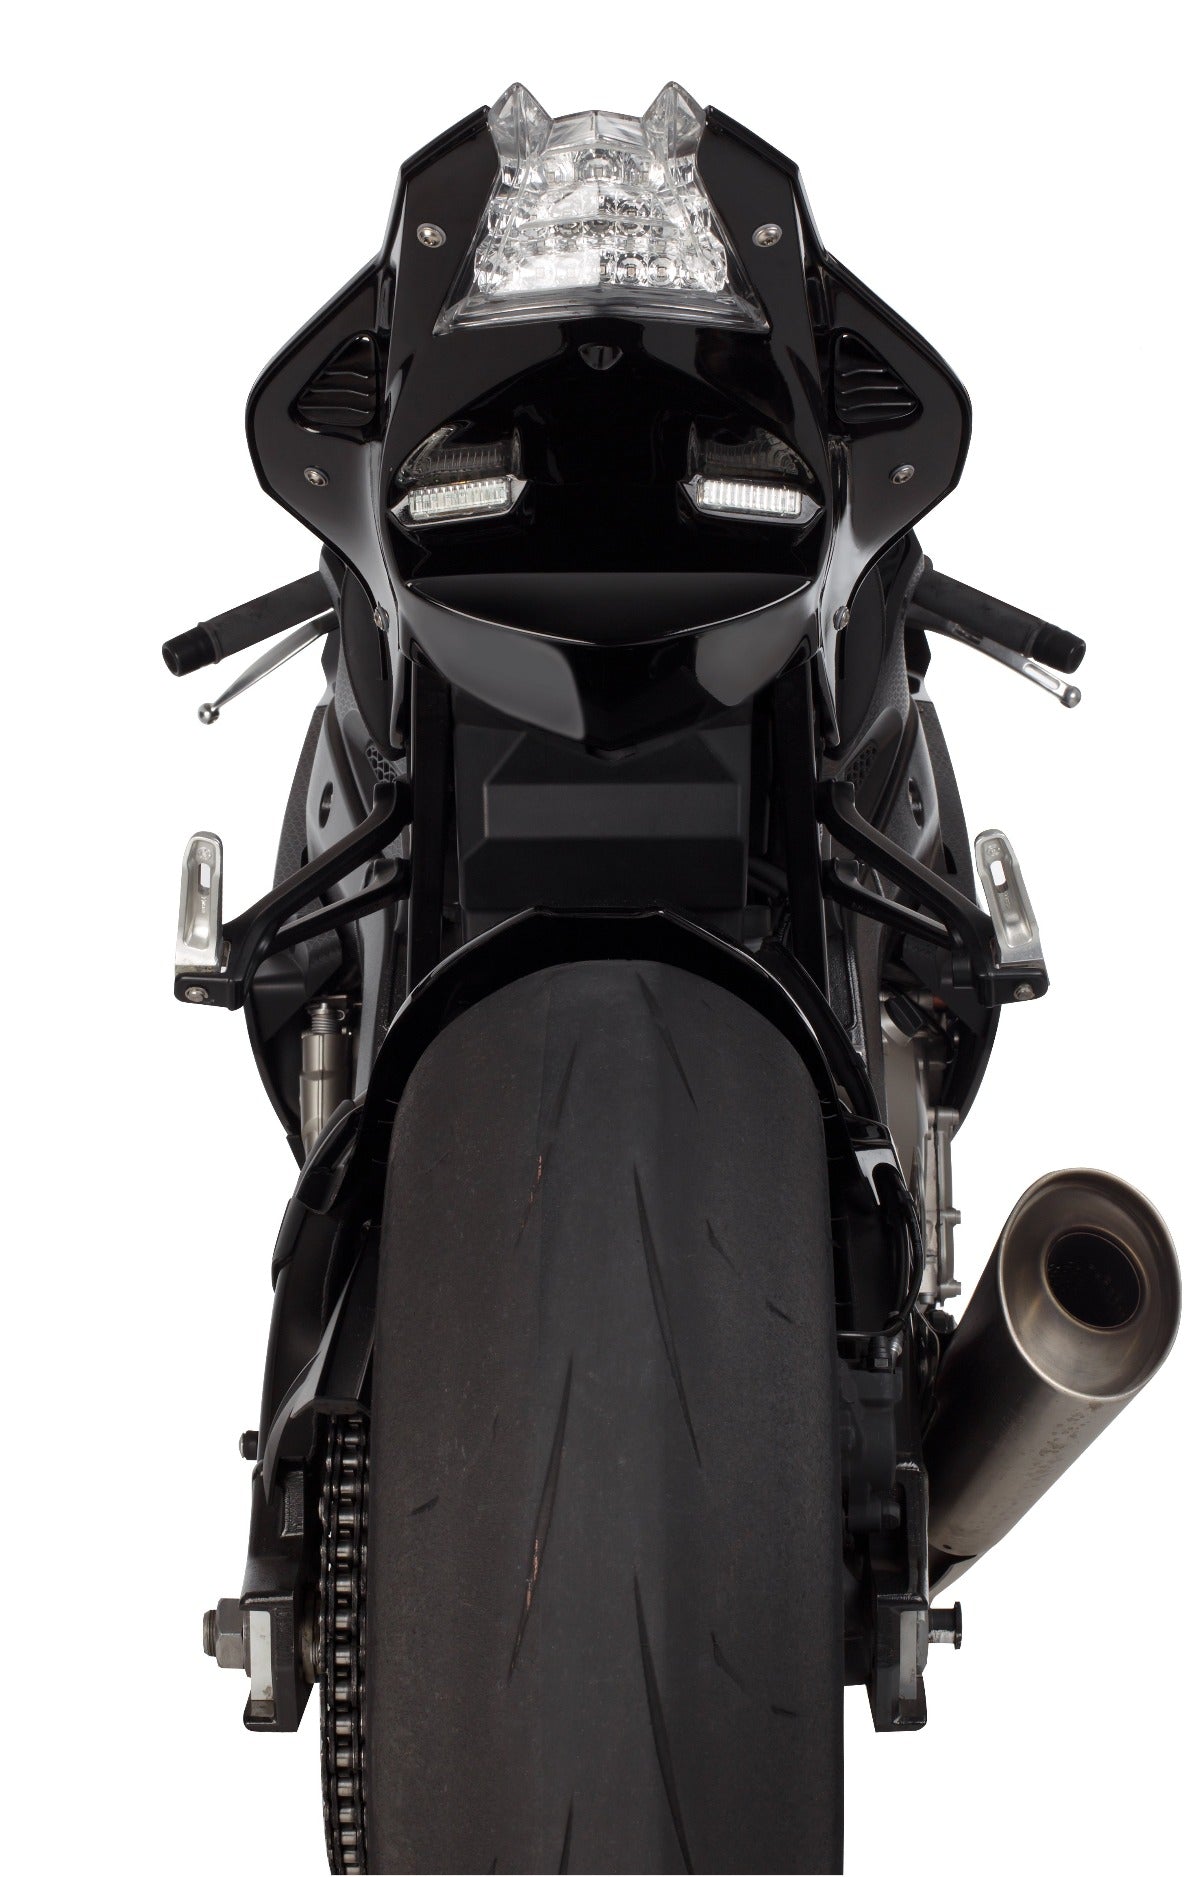 Hotbodies Racing Undertail for BMW S1000RR 2012-14